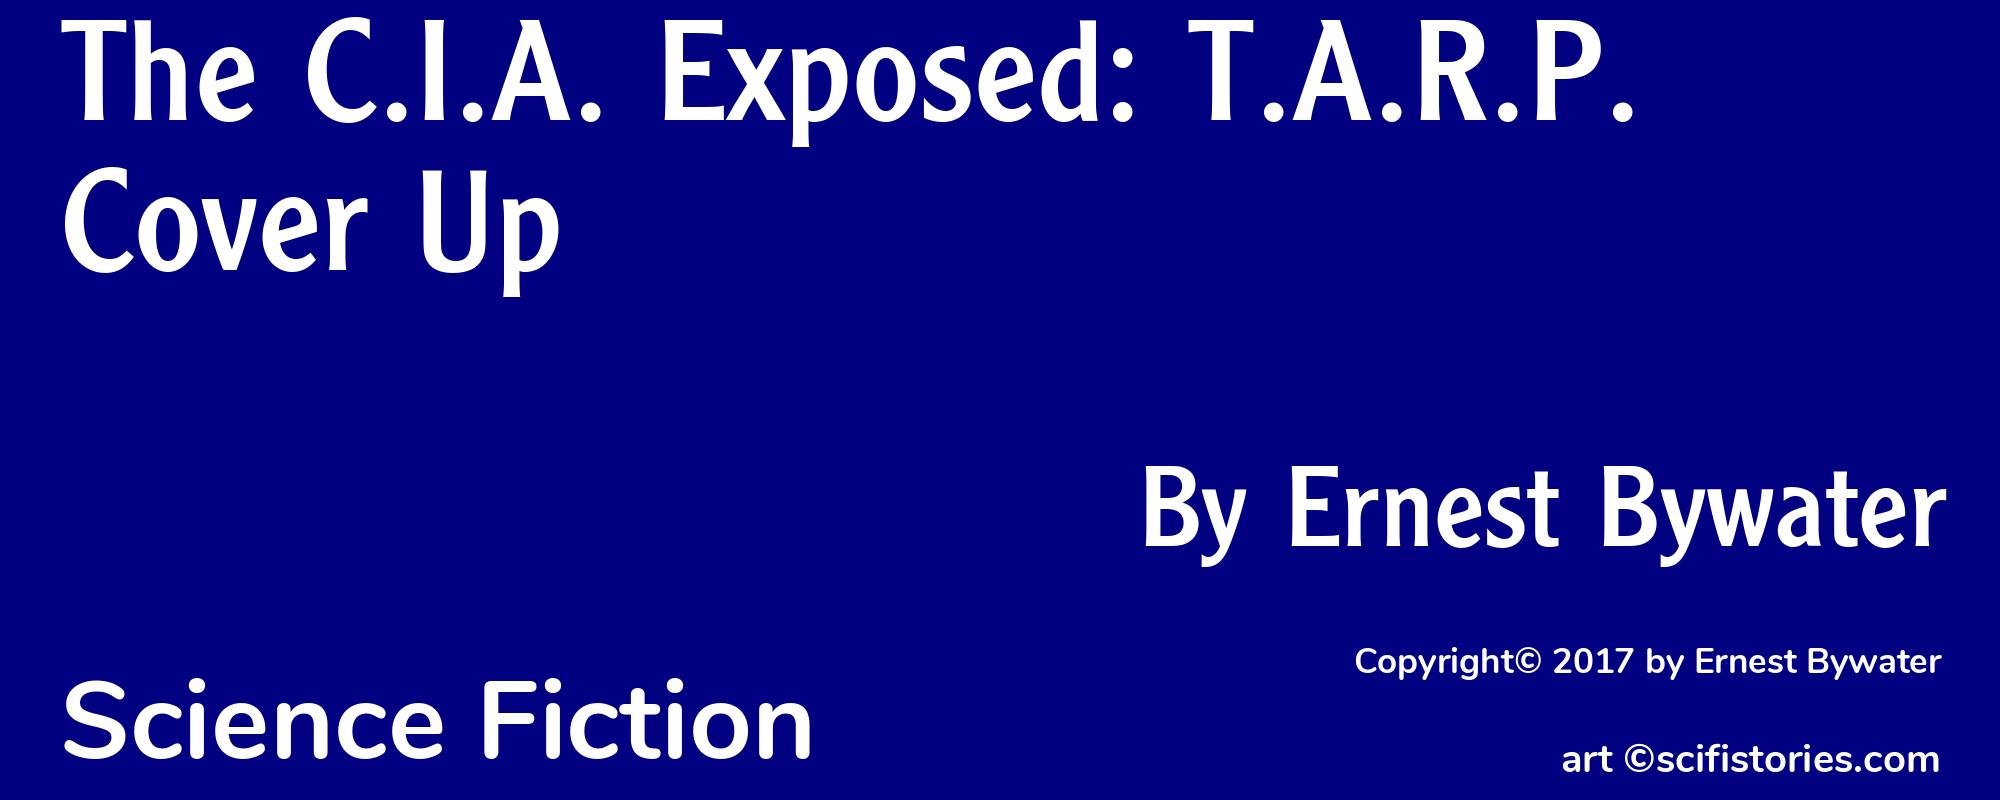 The C.I.A. Exposed: T.A.R.P. Cover Up - Cover